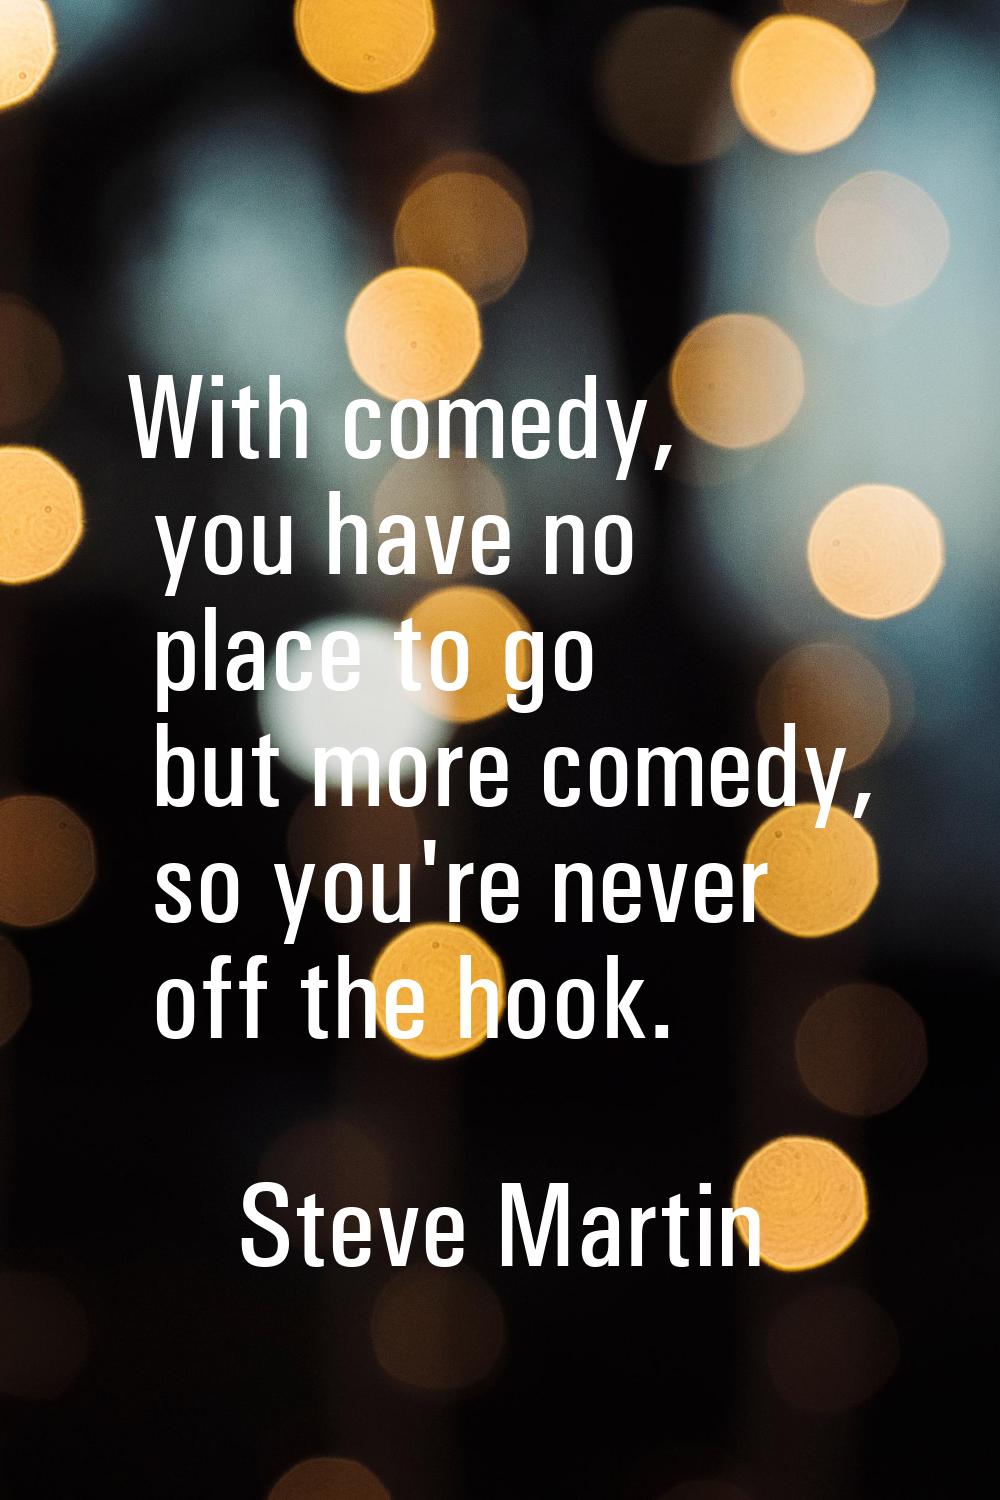 With comedy, you have no place to go but more comedy, so you're never off the hook.